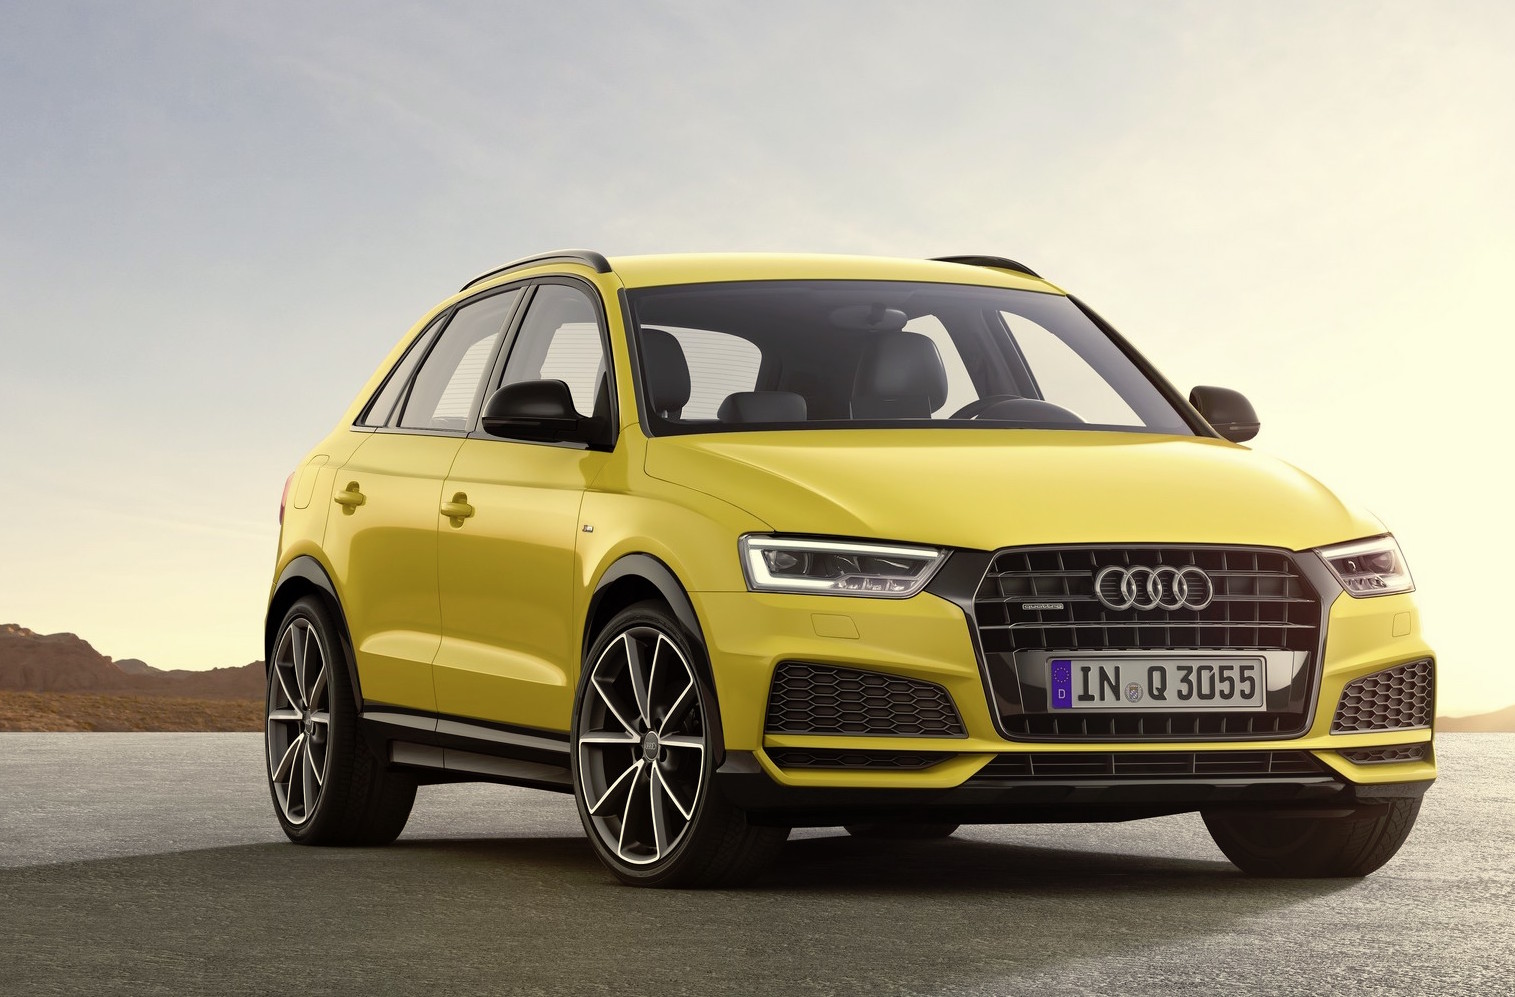 2017 Audi Q3 update introduces S line package